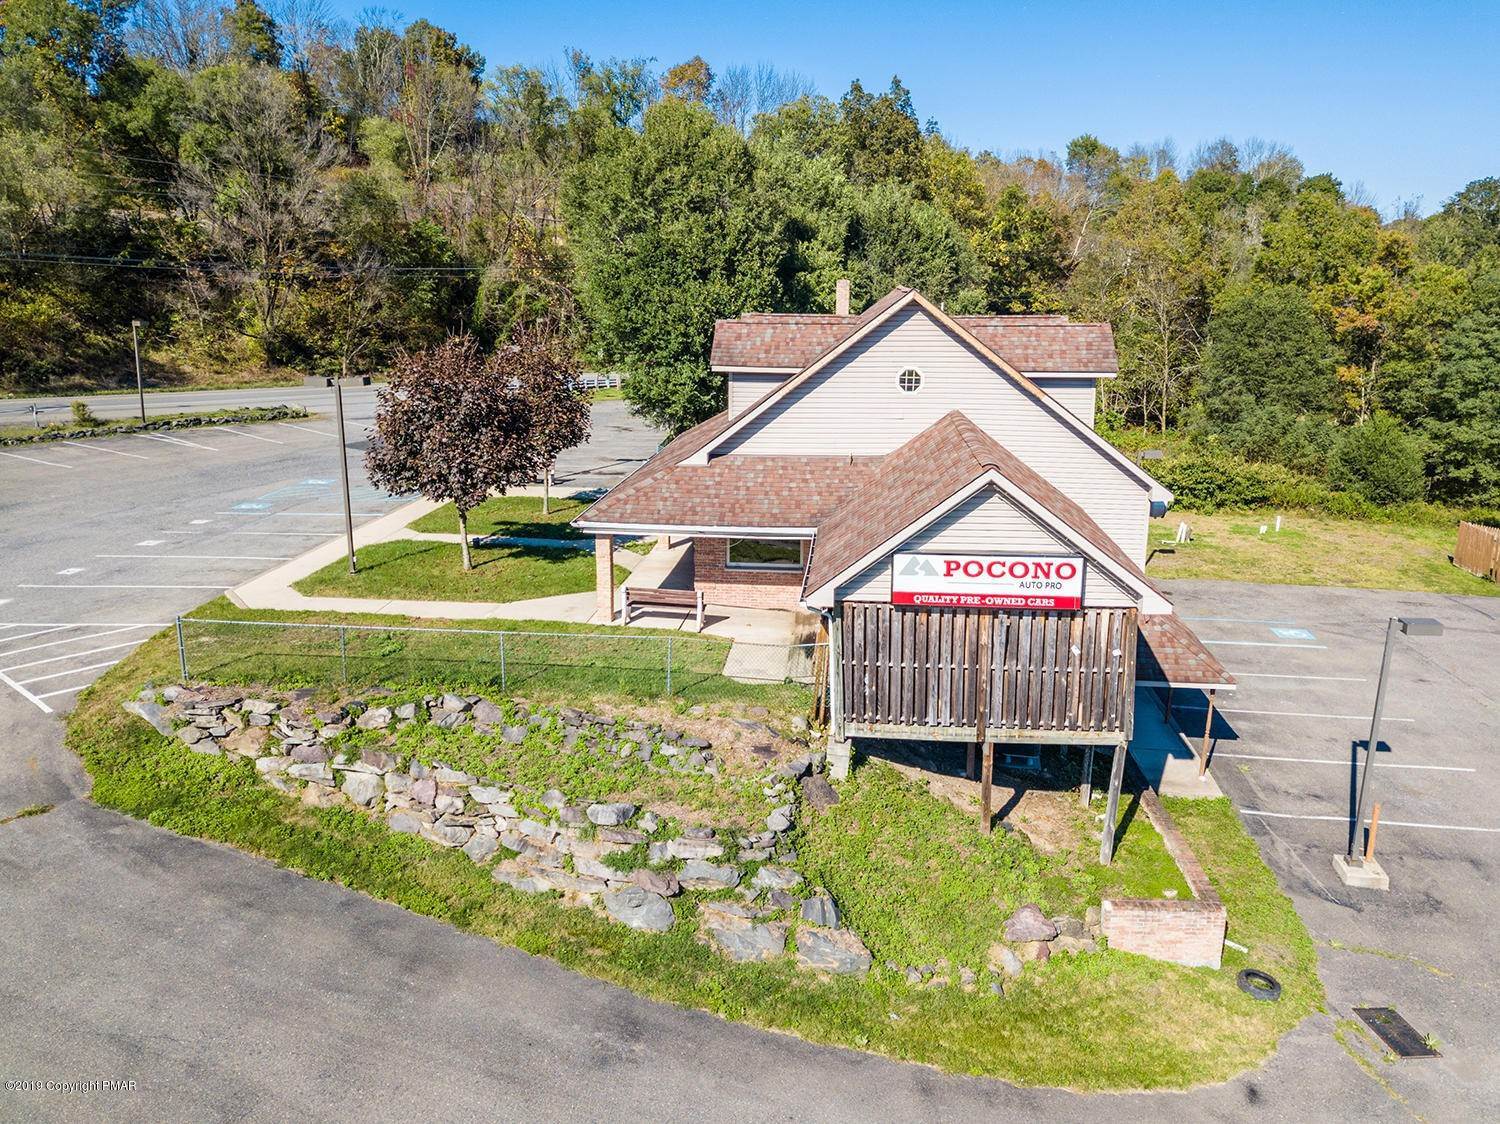 10. Commercial for Sale at 6568 Route 209, Unit 1 Stroudsburg, Pennsylvania 18360 United States